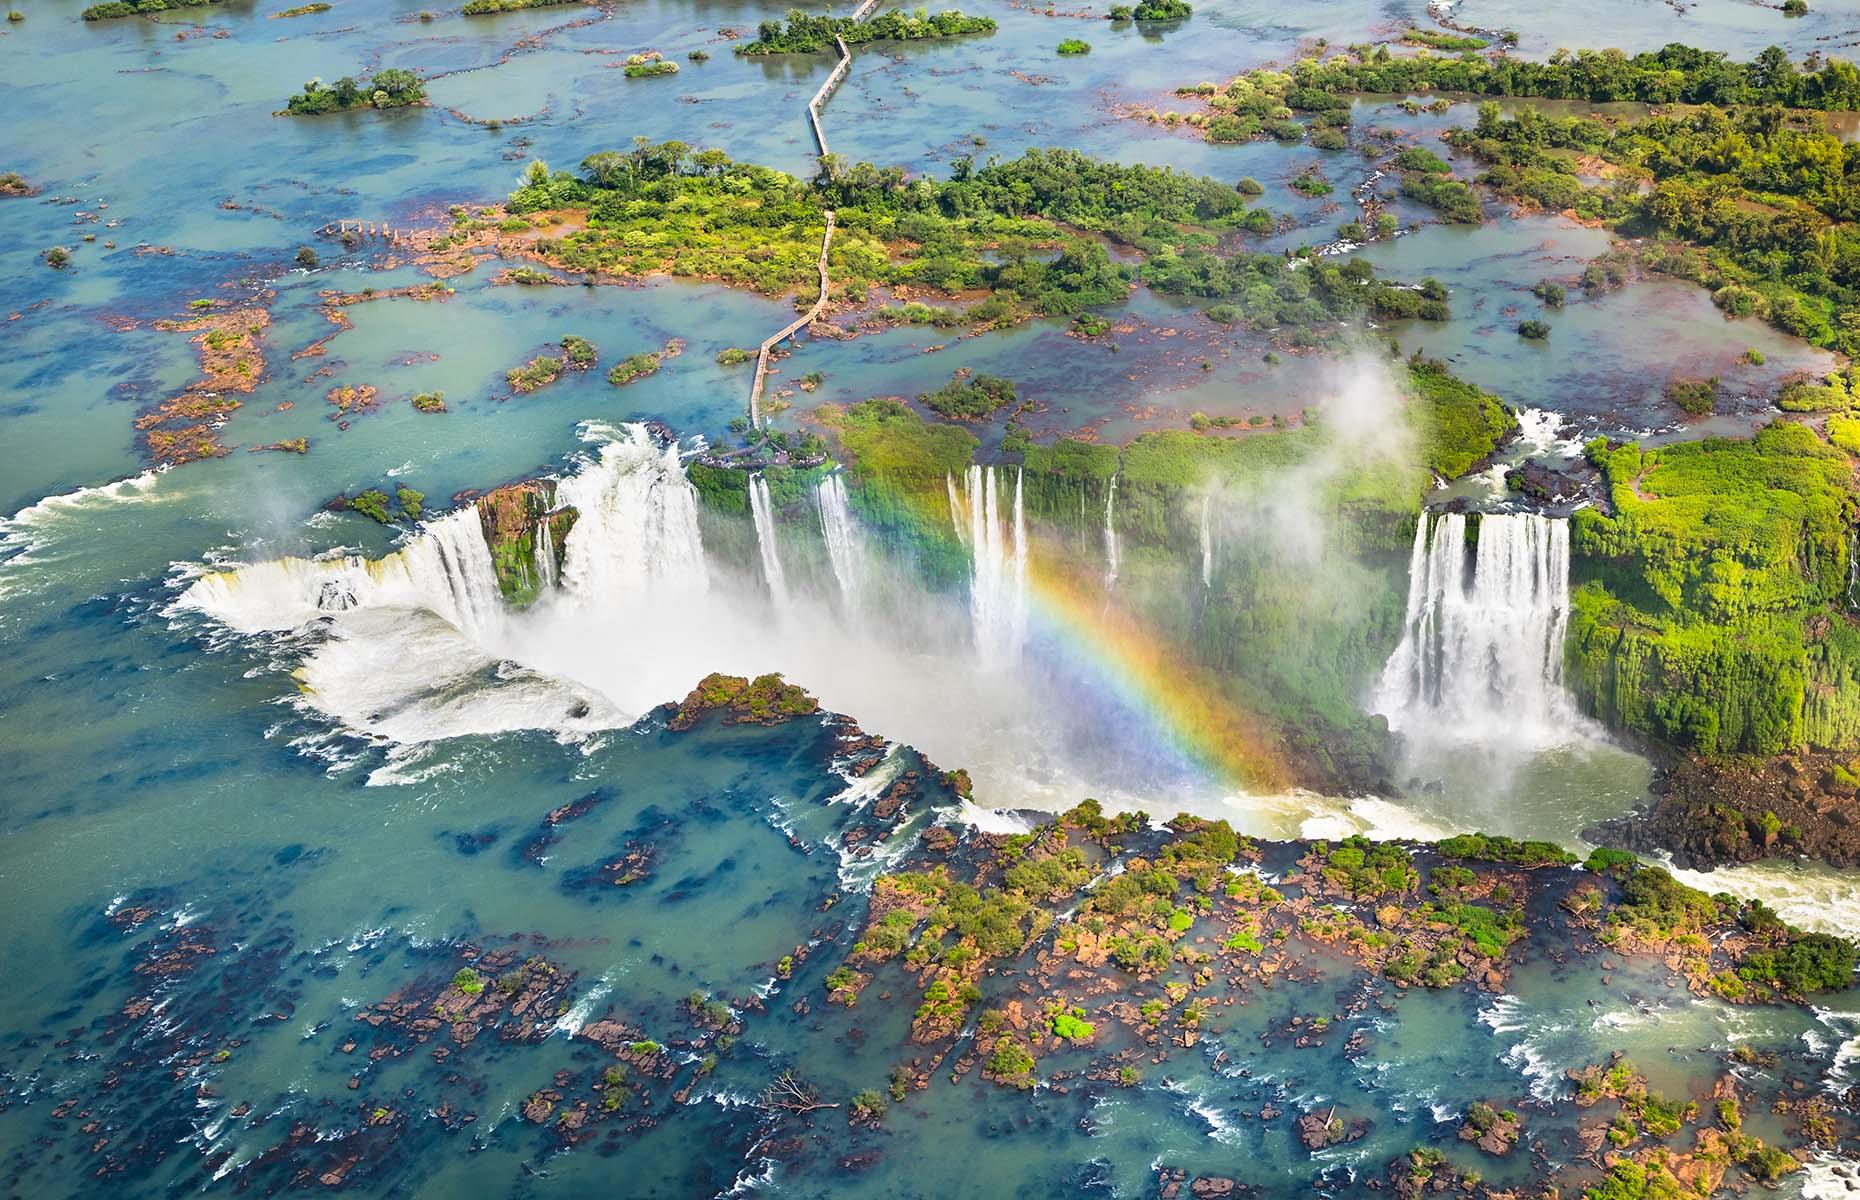 When one waterfall just isn’t enough, there’s Iguazú Falls – the world’s largest waterfall system that certainly makes for one of the most awe-inspiring sights. The chain of cascades, which encompasses more than 270 waterfalls and covers 1.7 miles (2.7km), straddles the border of Brazil and Argentina, and flows in a staircase formation. Its setting, in the heart of a national park thick with rainforest, is equally beguiling.